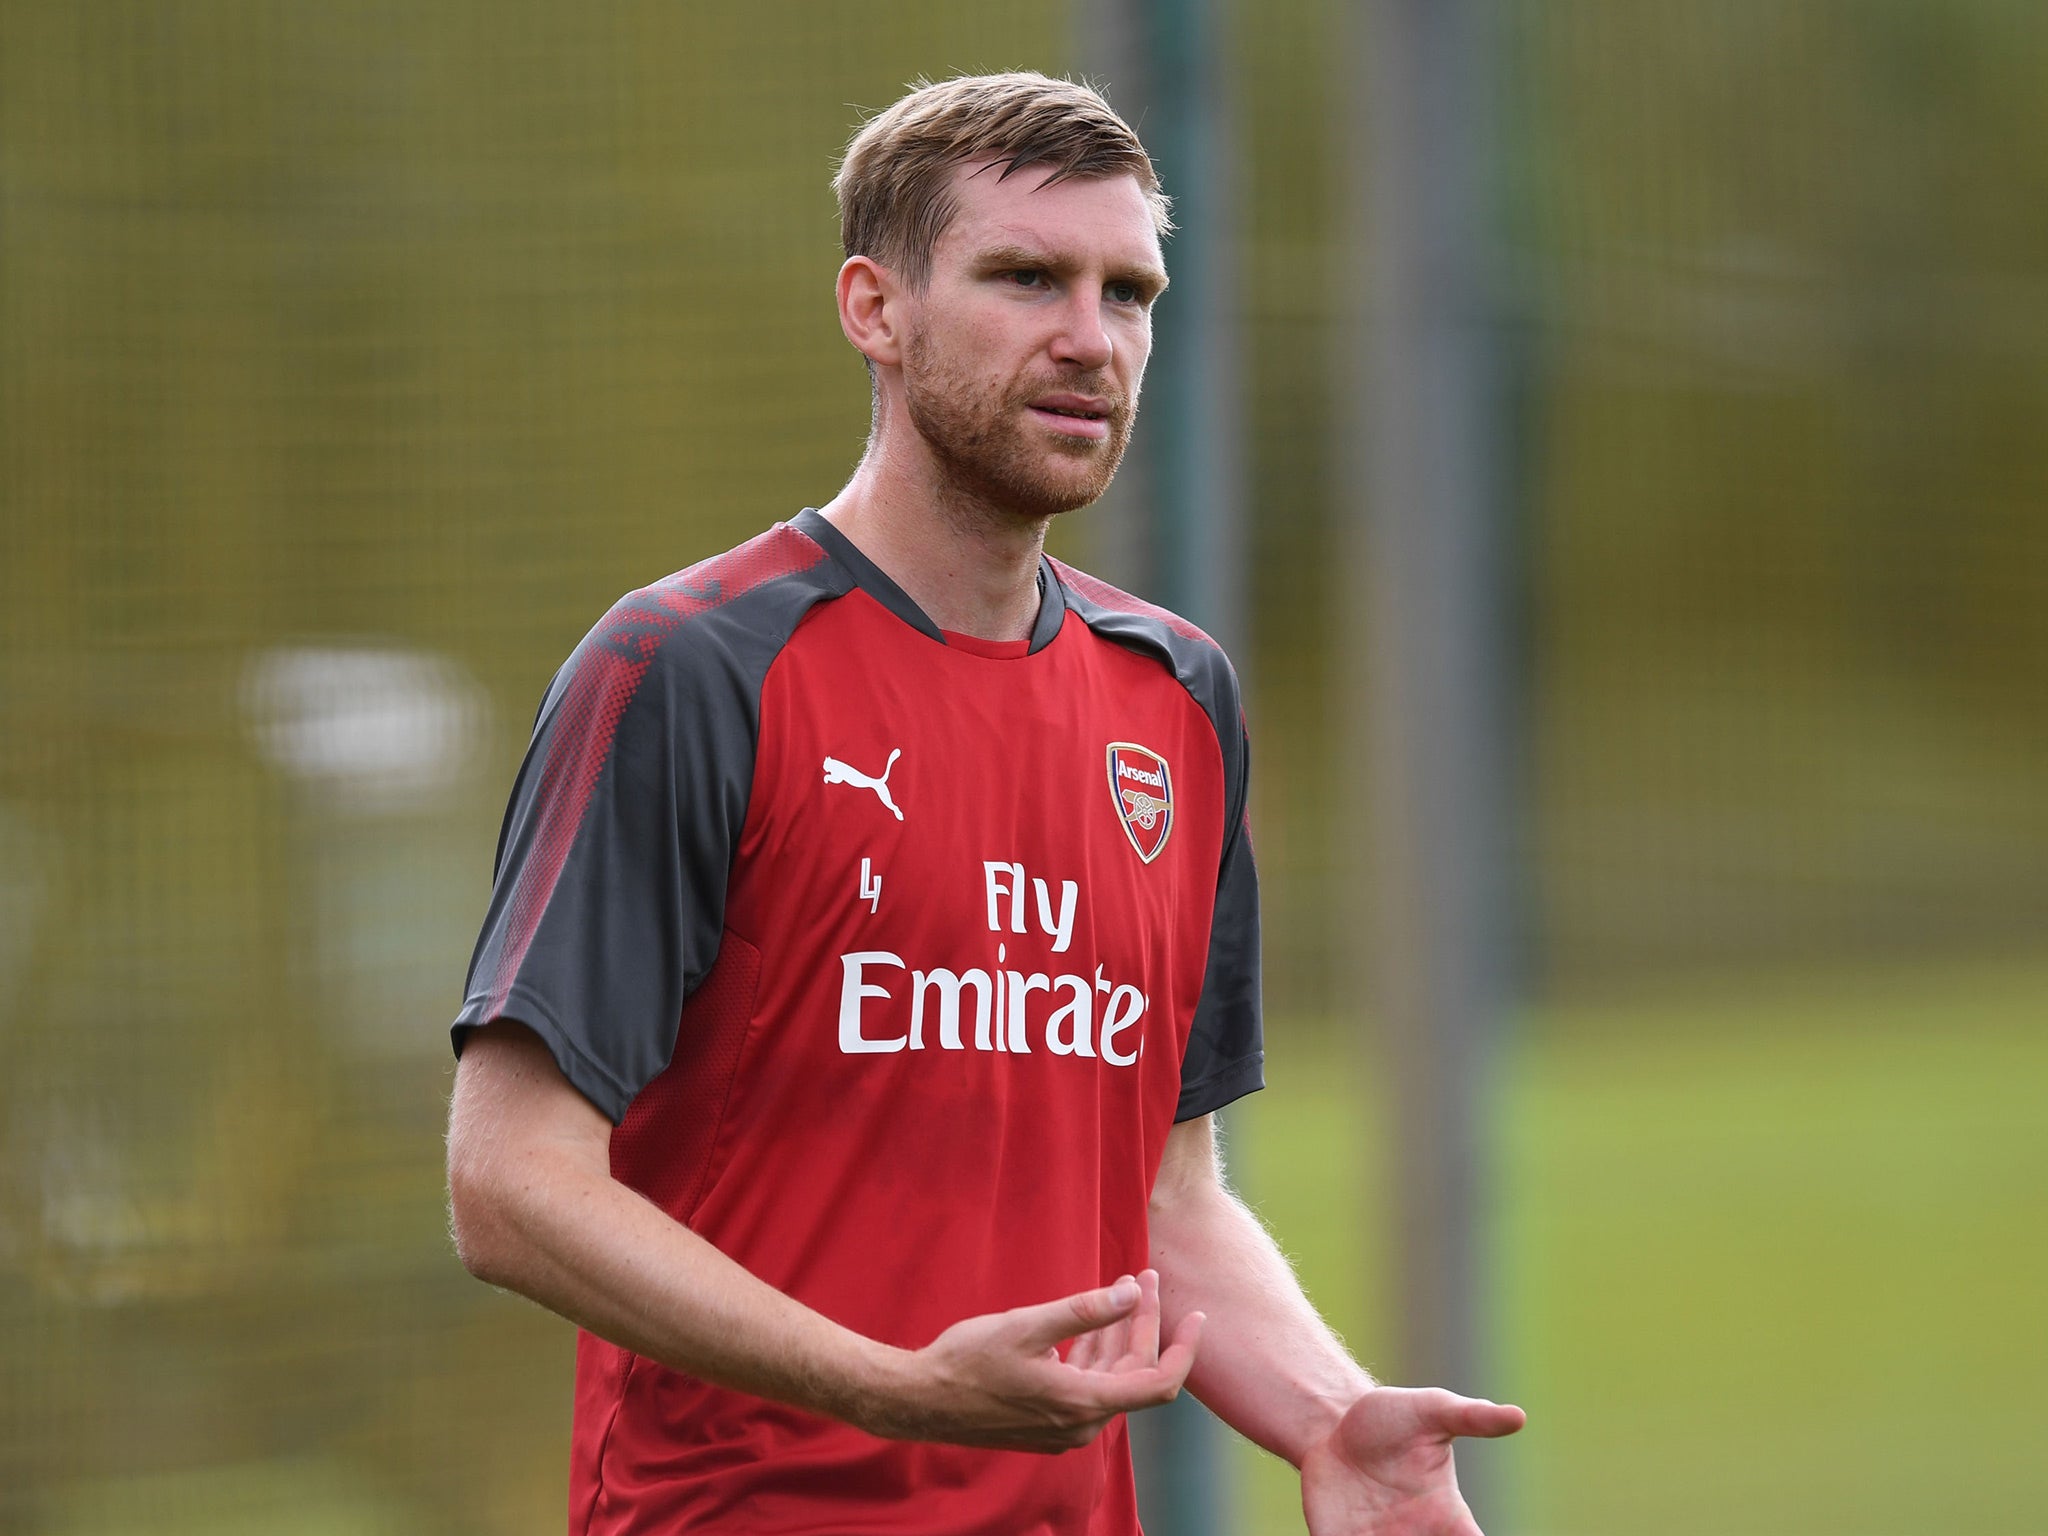 Per Mertesacker remains one of Arsene Wenger’s most trusted players